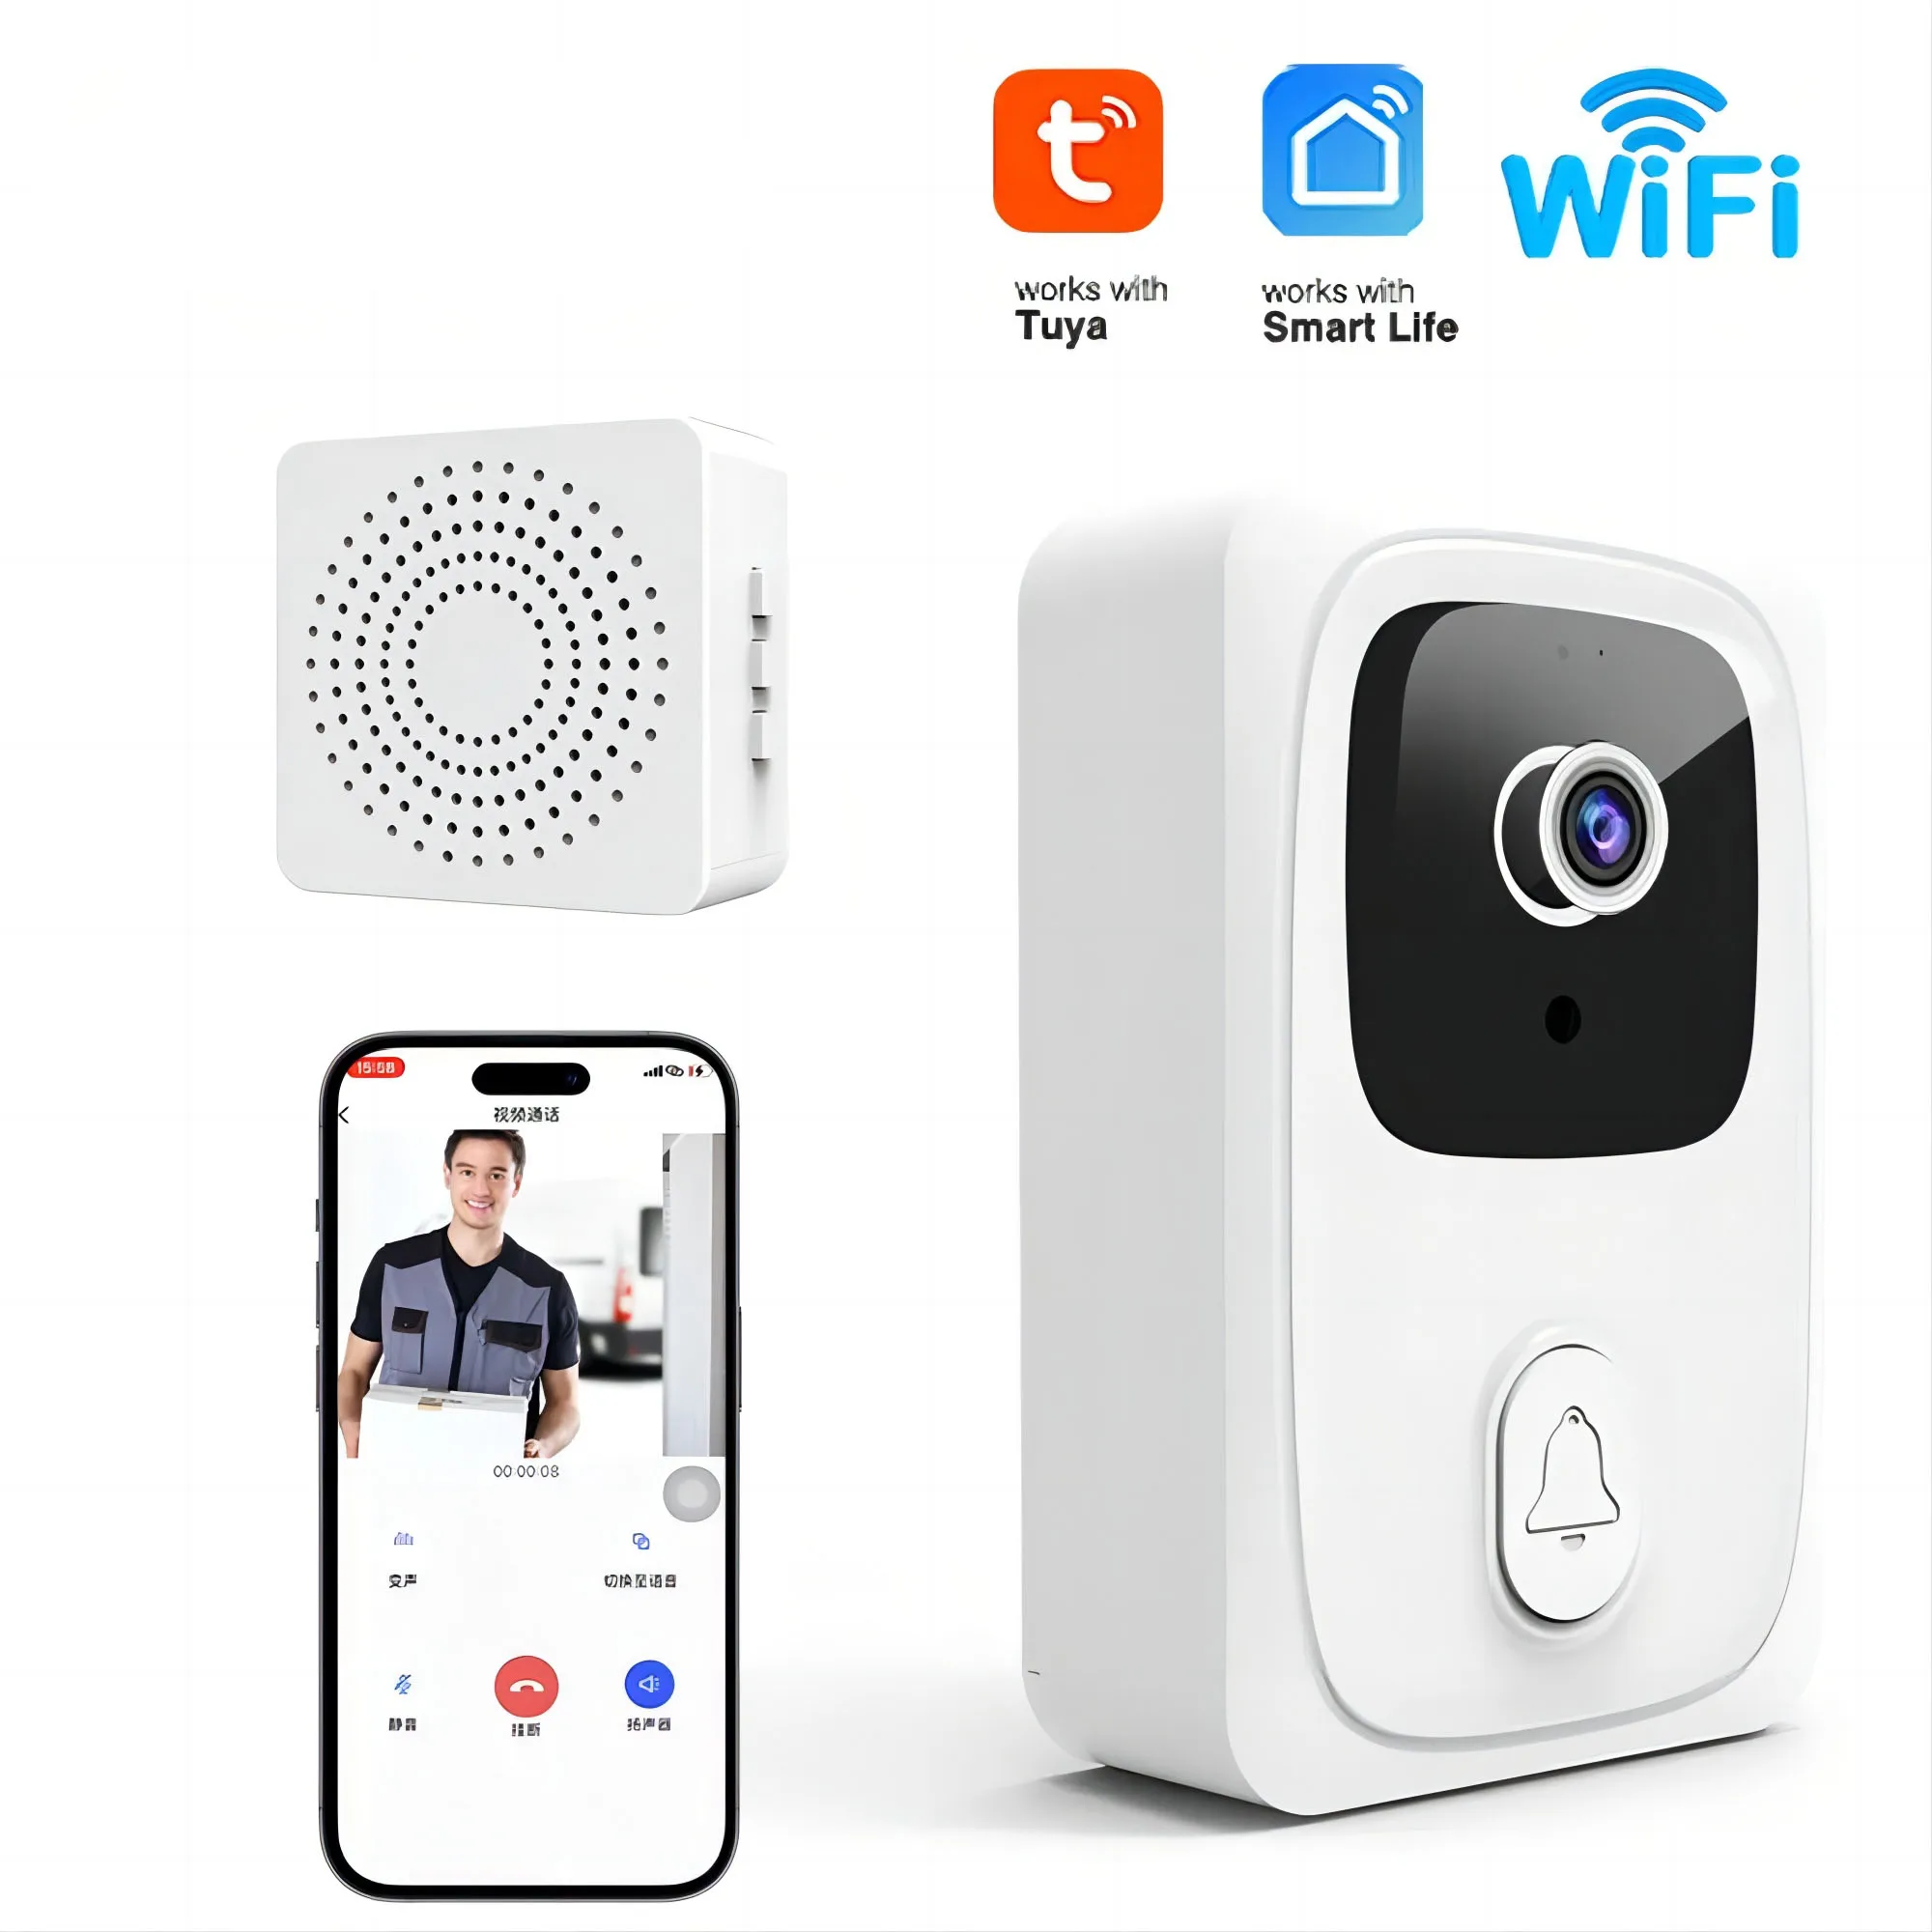 Tuya Video Doorbell Wireless WiFi Door Bell Camera Smart Home Security Night Vision Motion Detection Visual Intercom with Chime wifi doorbell smart home wireless phone wifi door bell camera ir night vision security video intercom 1080p hd for apartments